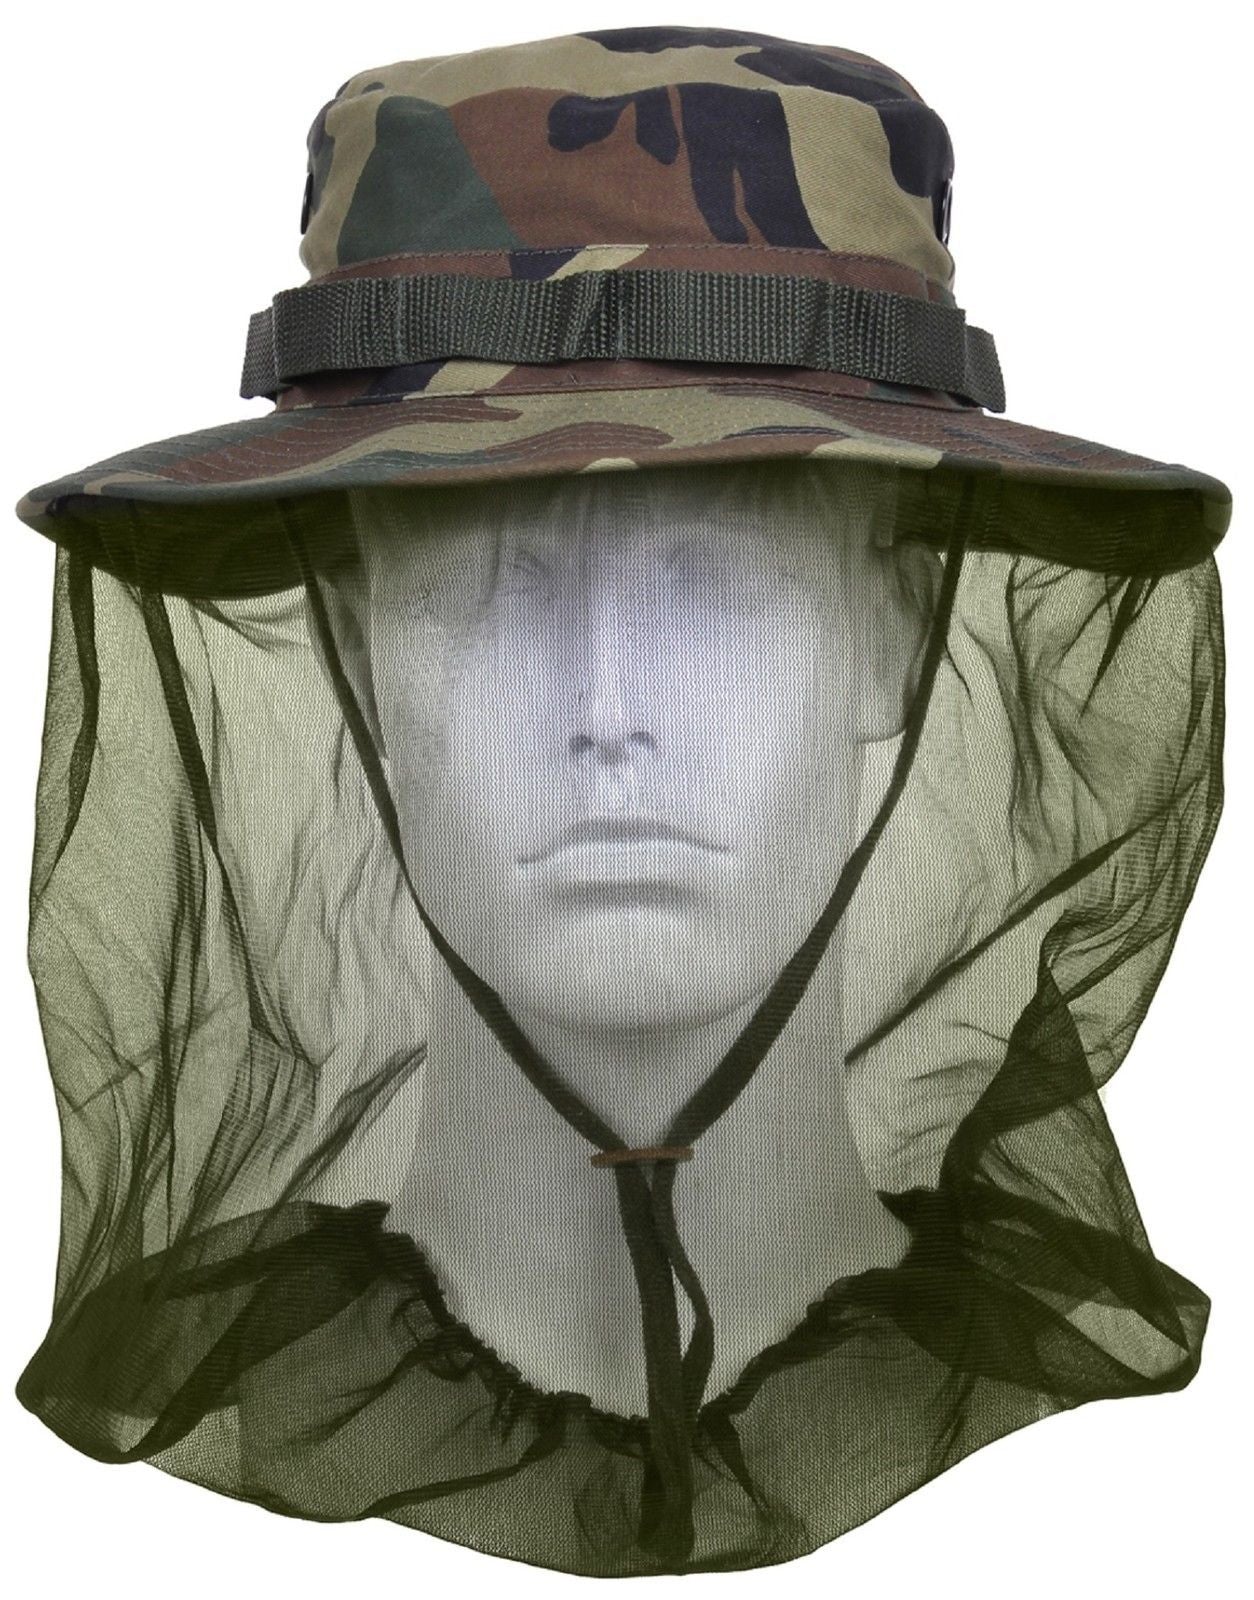 Woodland Camouflage Boonie Hat w/ Mosquito Head Netting Camping Hunting Bucket